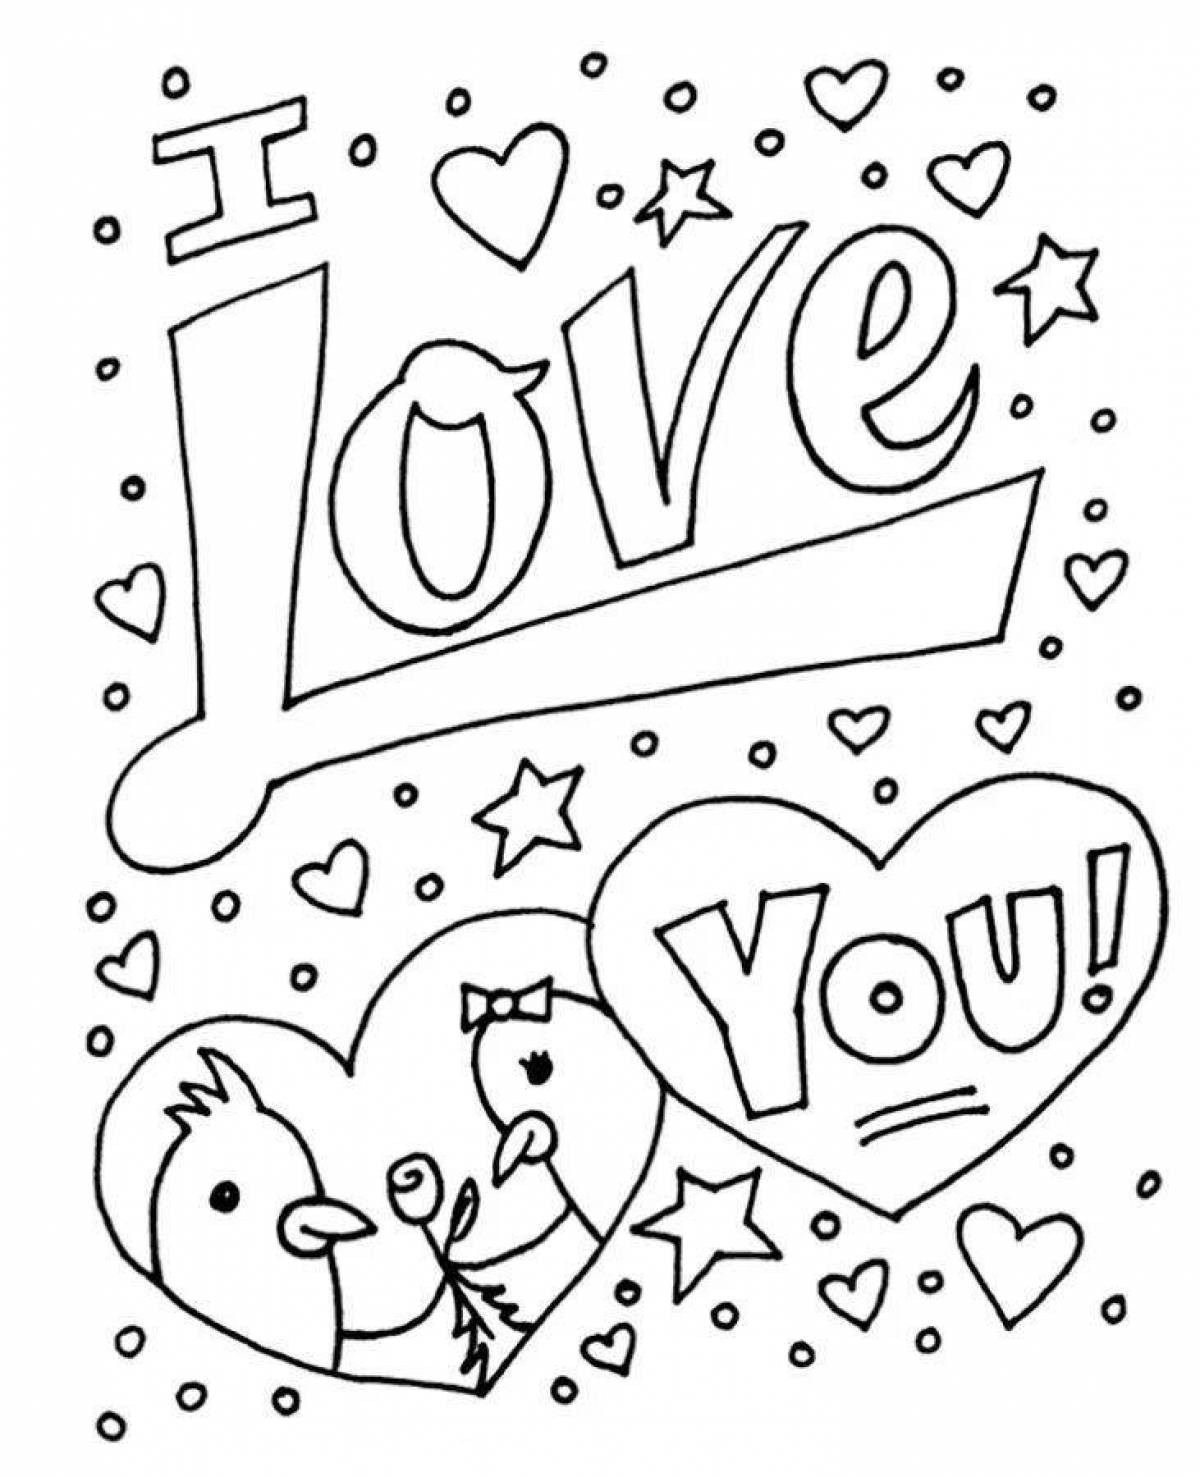 Rave coloring page 15